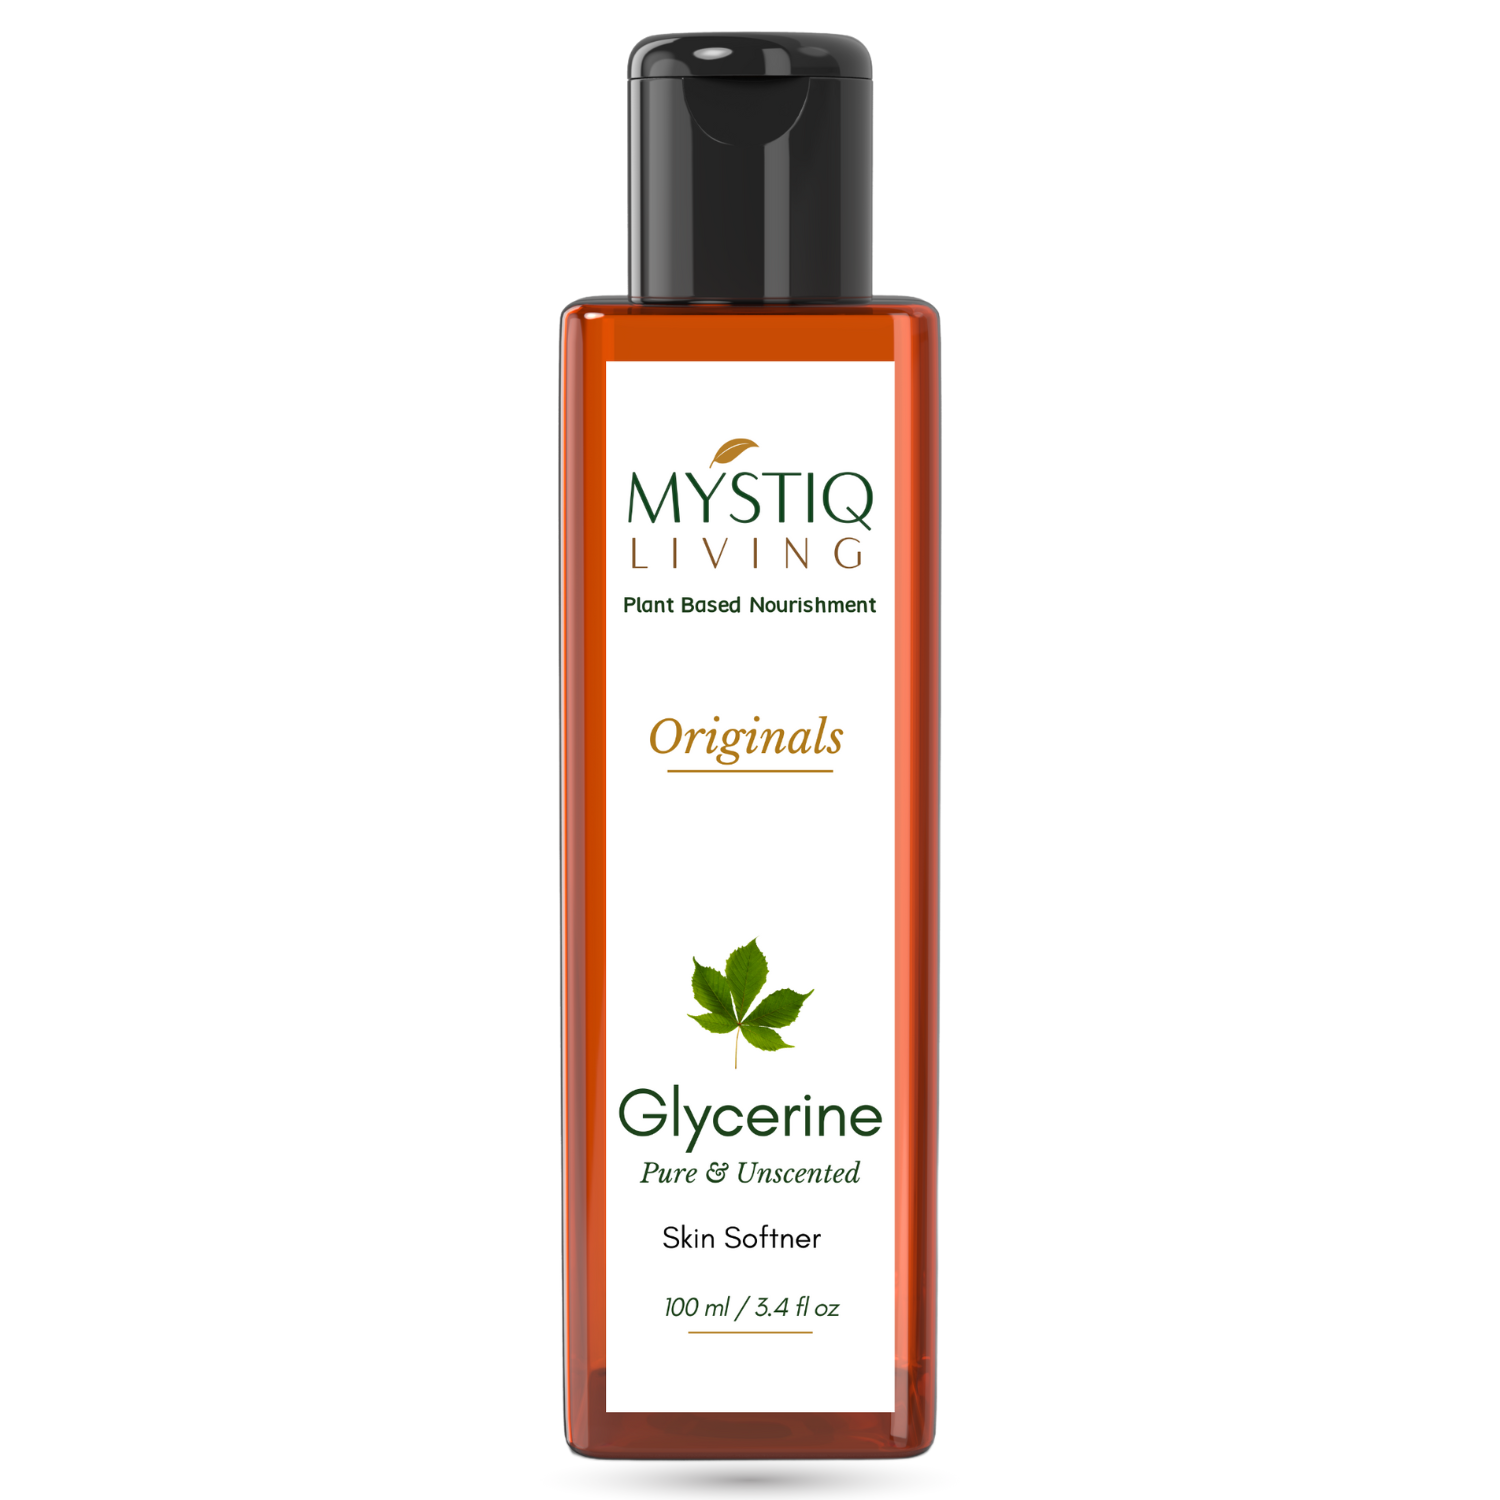 Glycerine for Face, Skin and Body Care